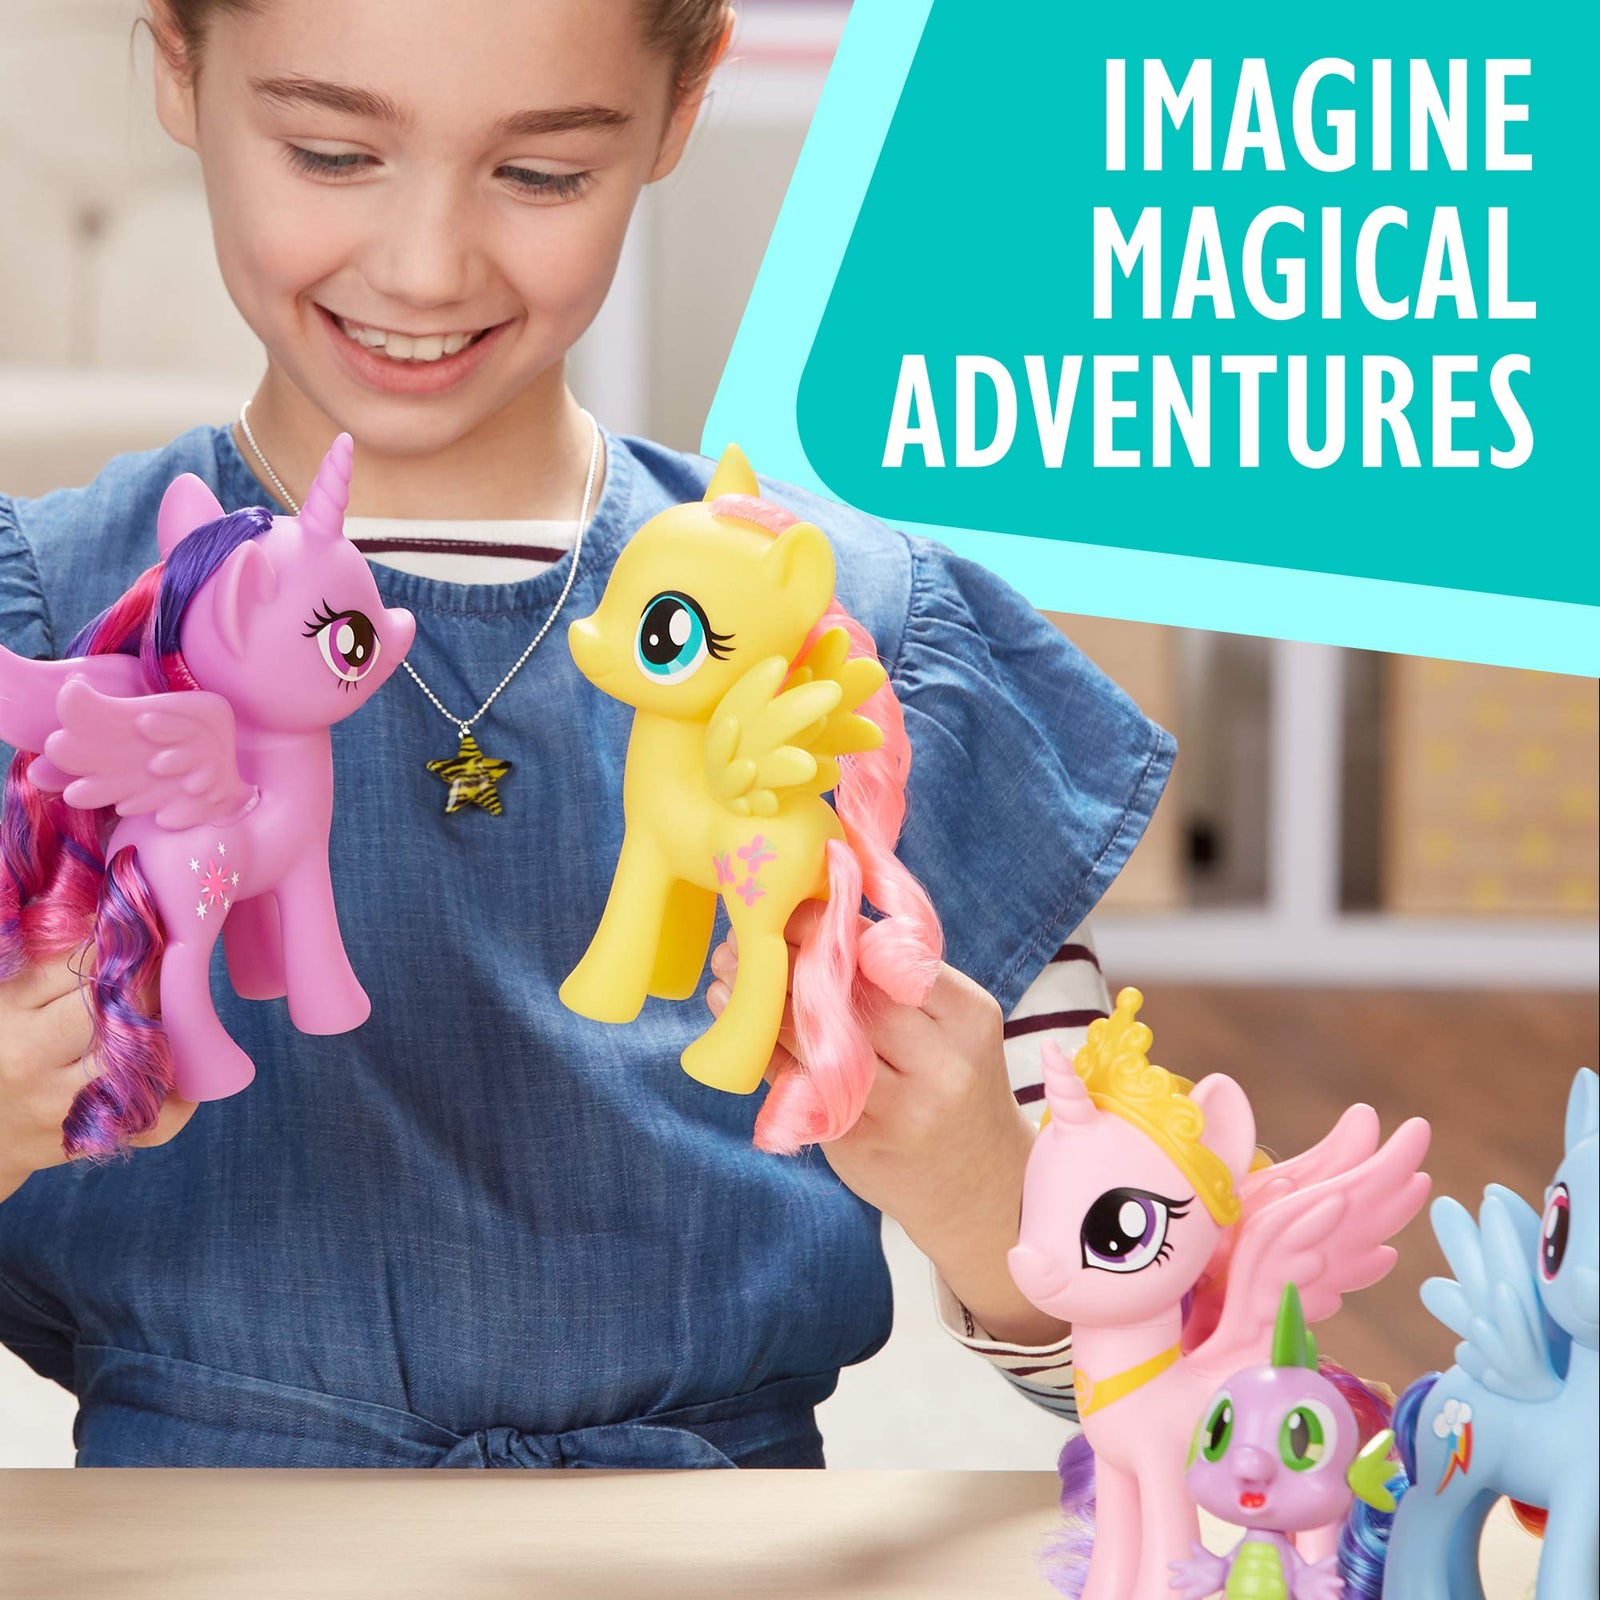 My Little Pony Friendship is Magic Toys Ultimate Equestria Collection – 10 Figure Set Including Mane 6, Princesses, and Spike the Dragon – Kids Ages 3 and Up